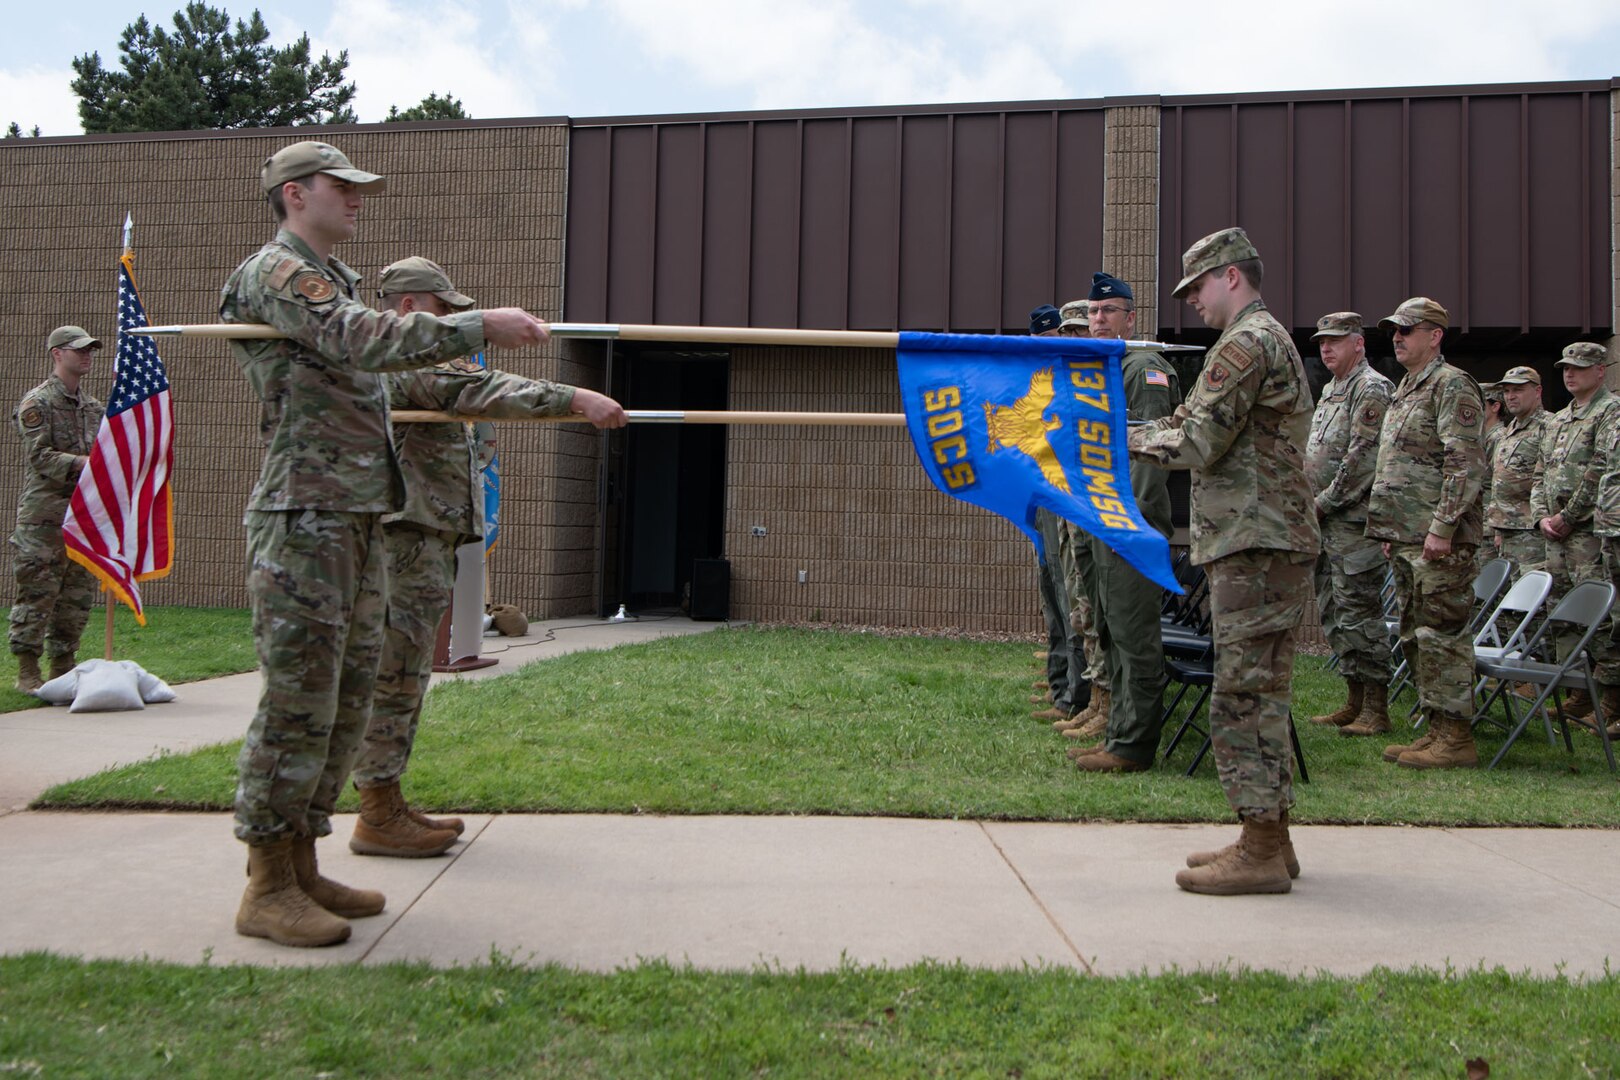 two people hold out guidons during a ceremony with onlookers